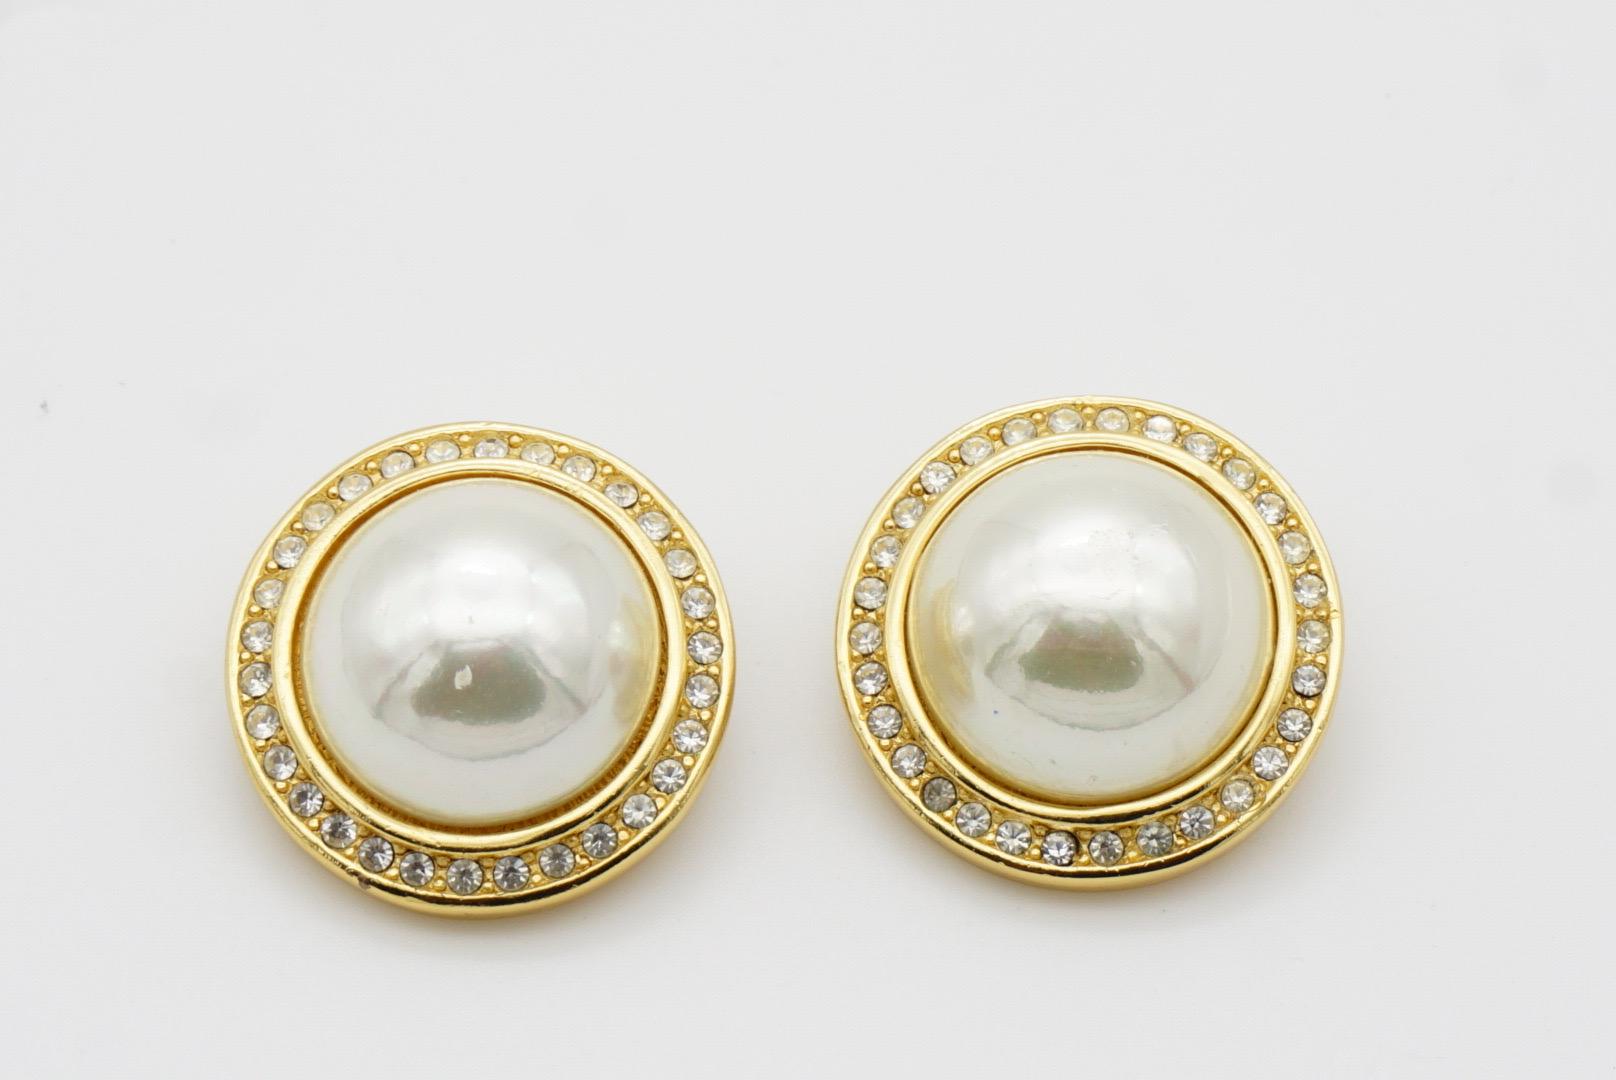 Christian Dior GROSSE 1990 CHC Large Round White Pearl Crystals Clip Earrings For Sale 2